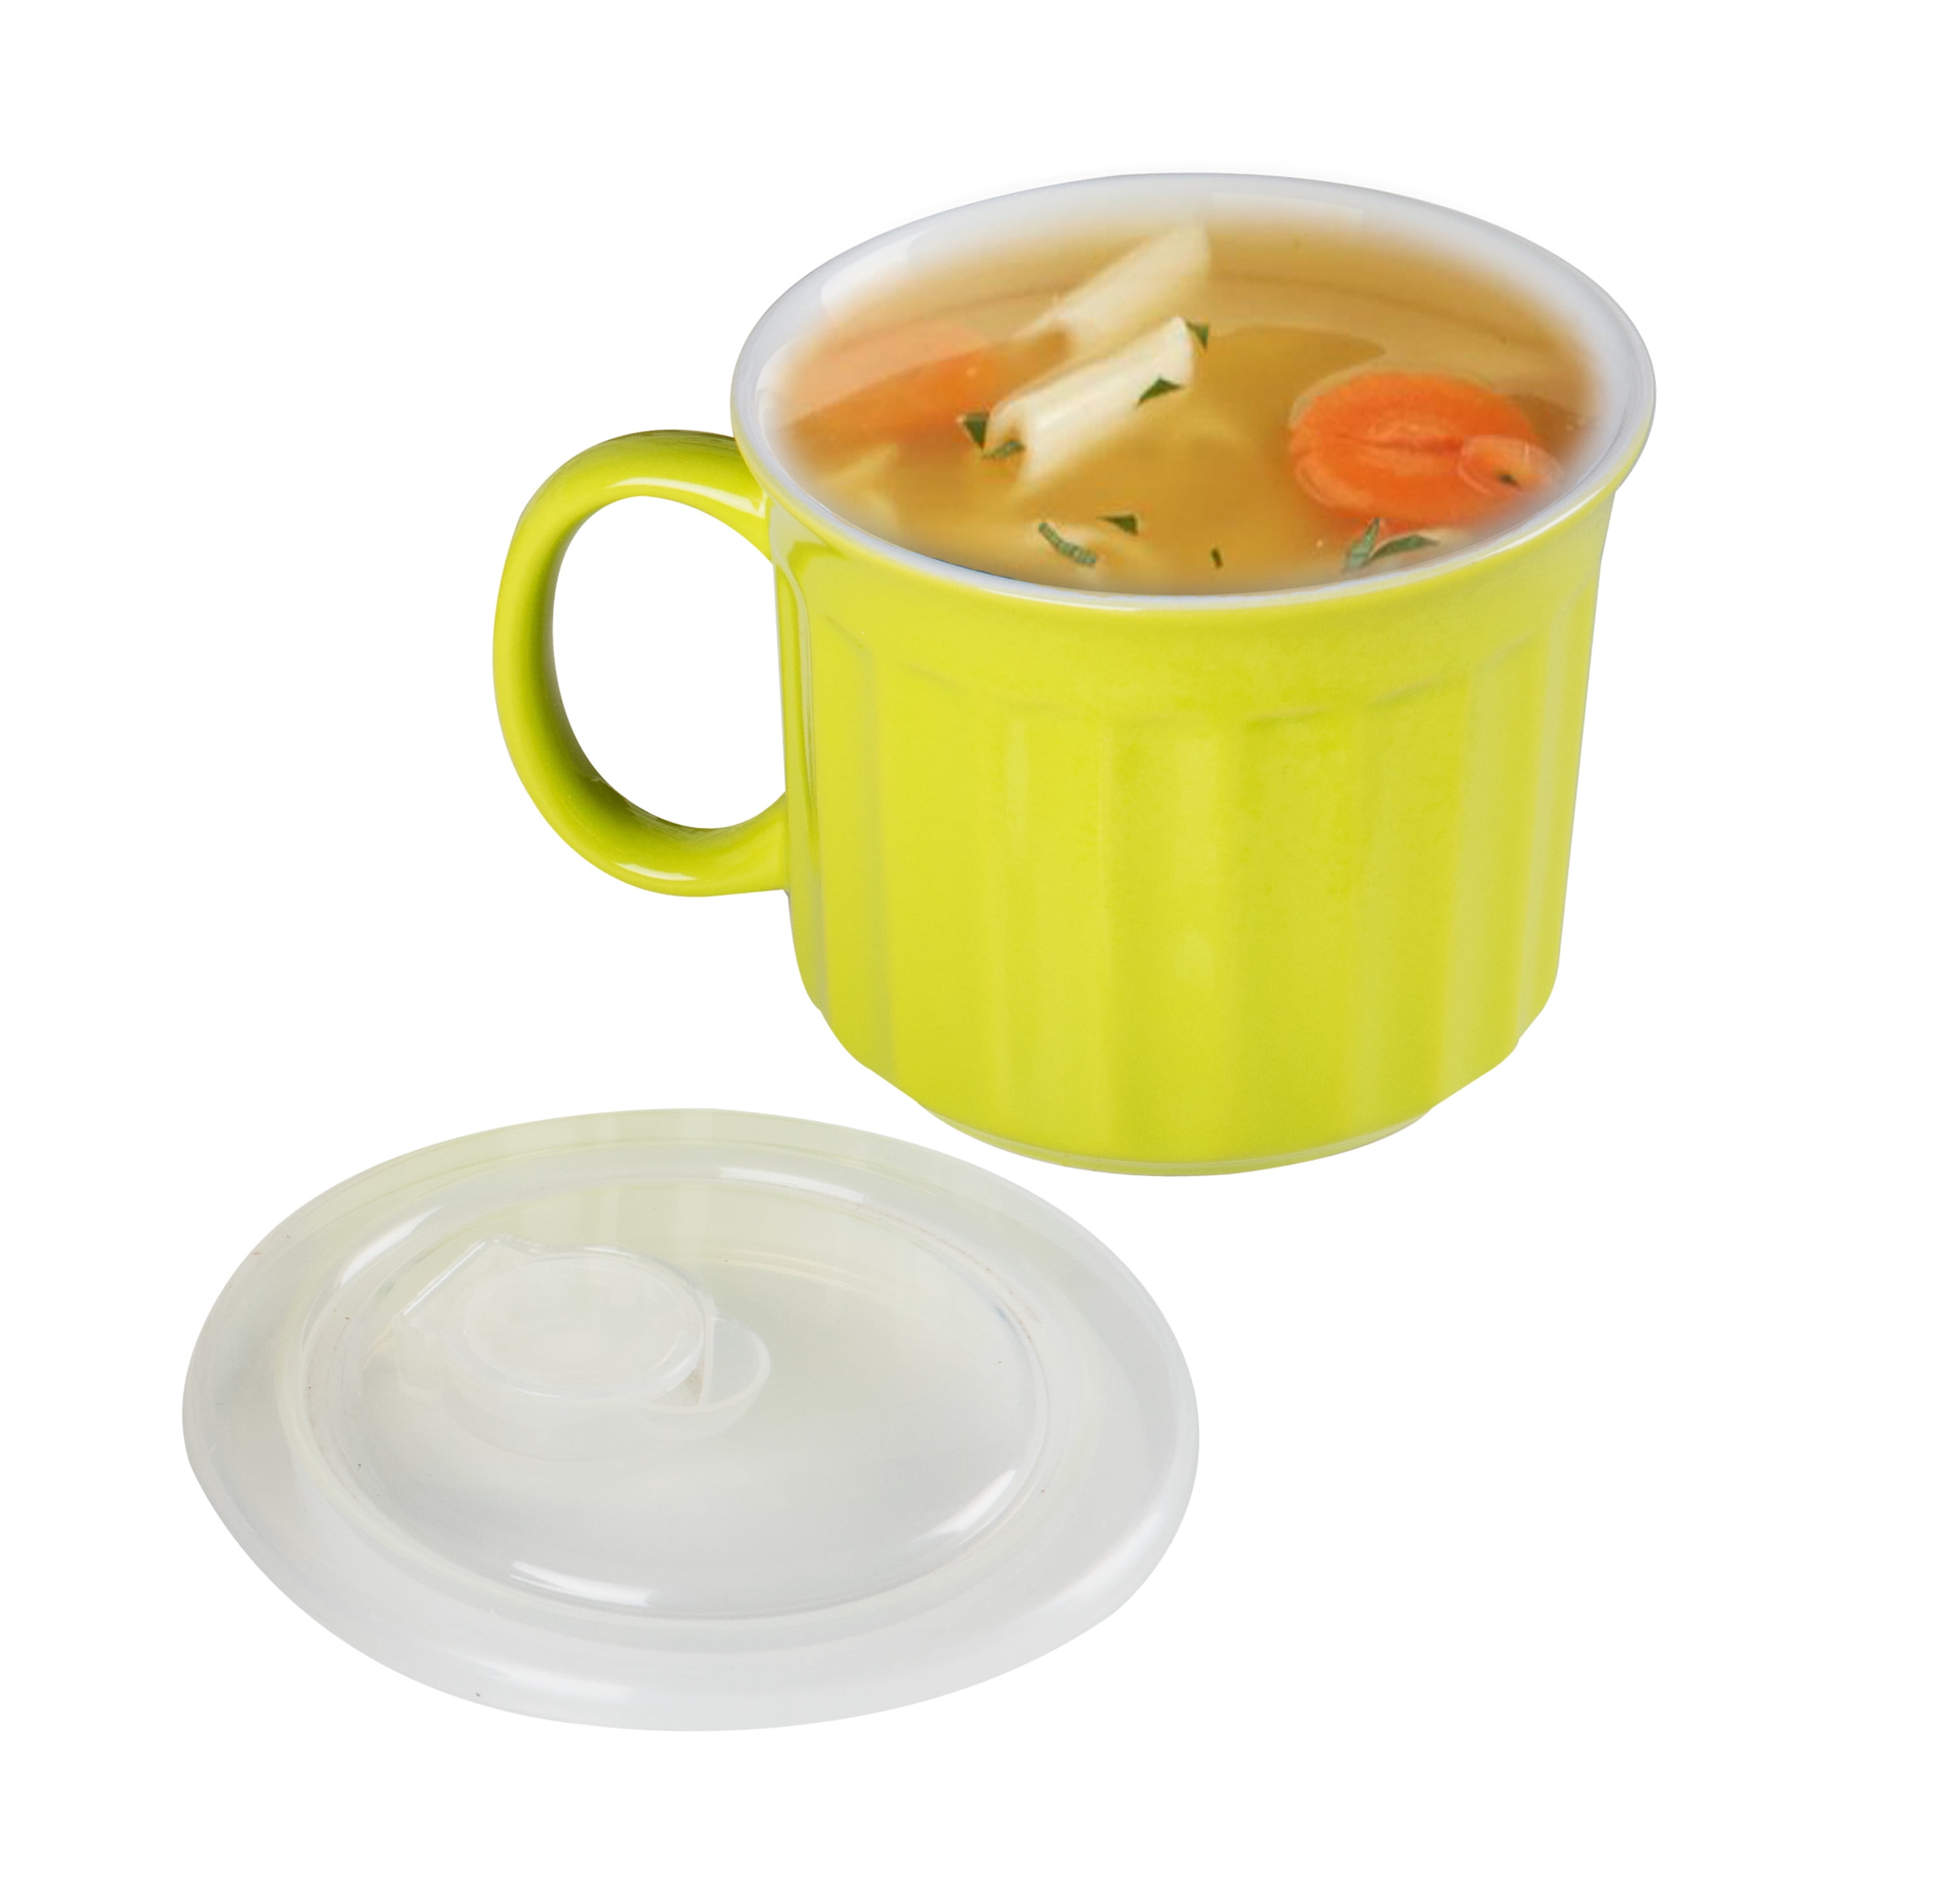 Thermal Soup Mug with Lid and Folding Scoop, Soup to Go Container Cereal  Cup with Lanyard for Soups, Noodles, Hot Cereal and More